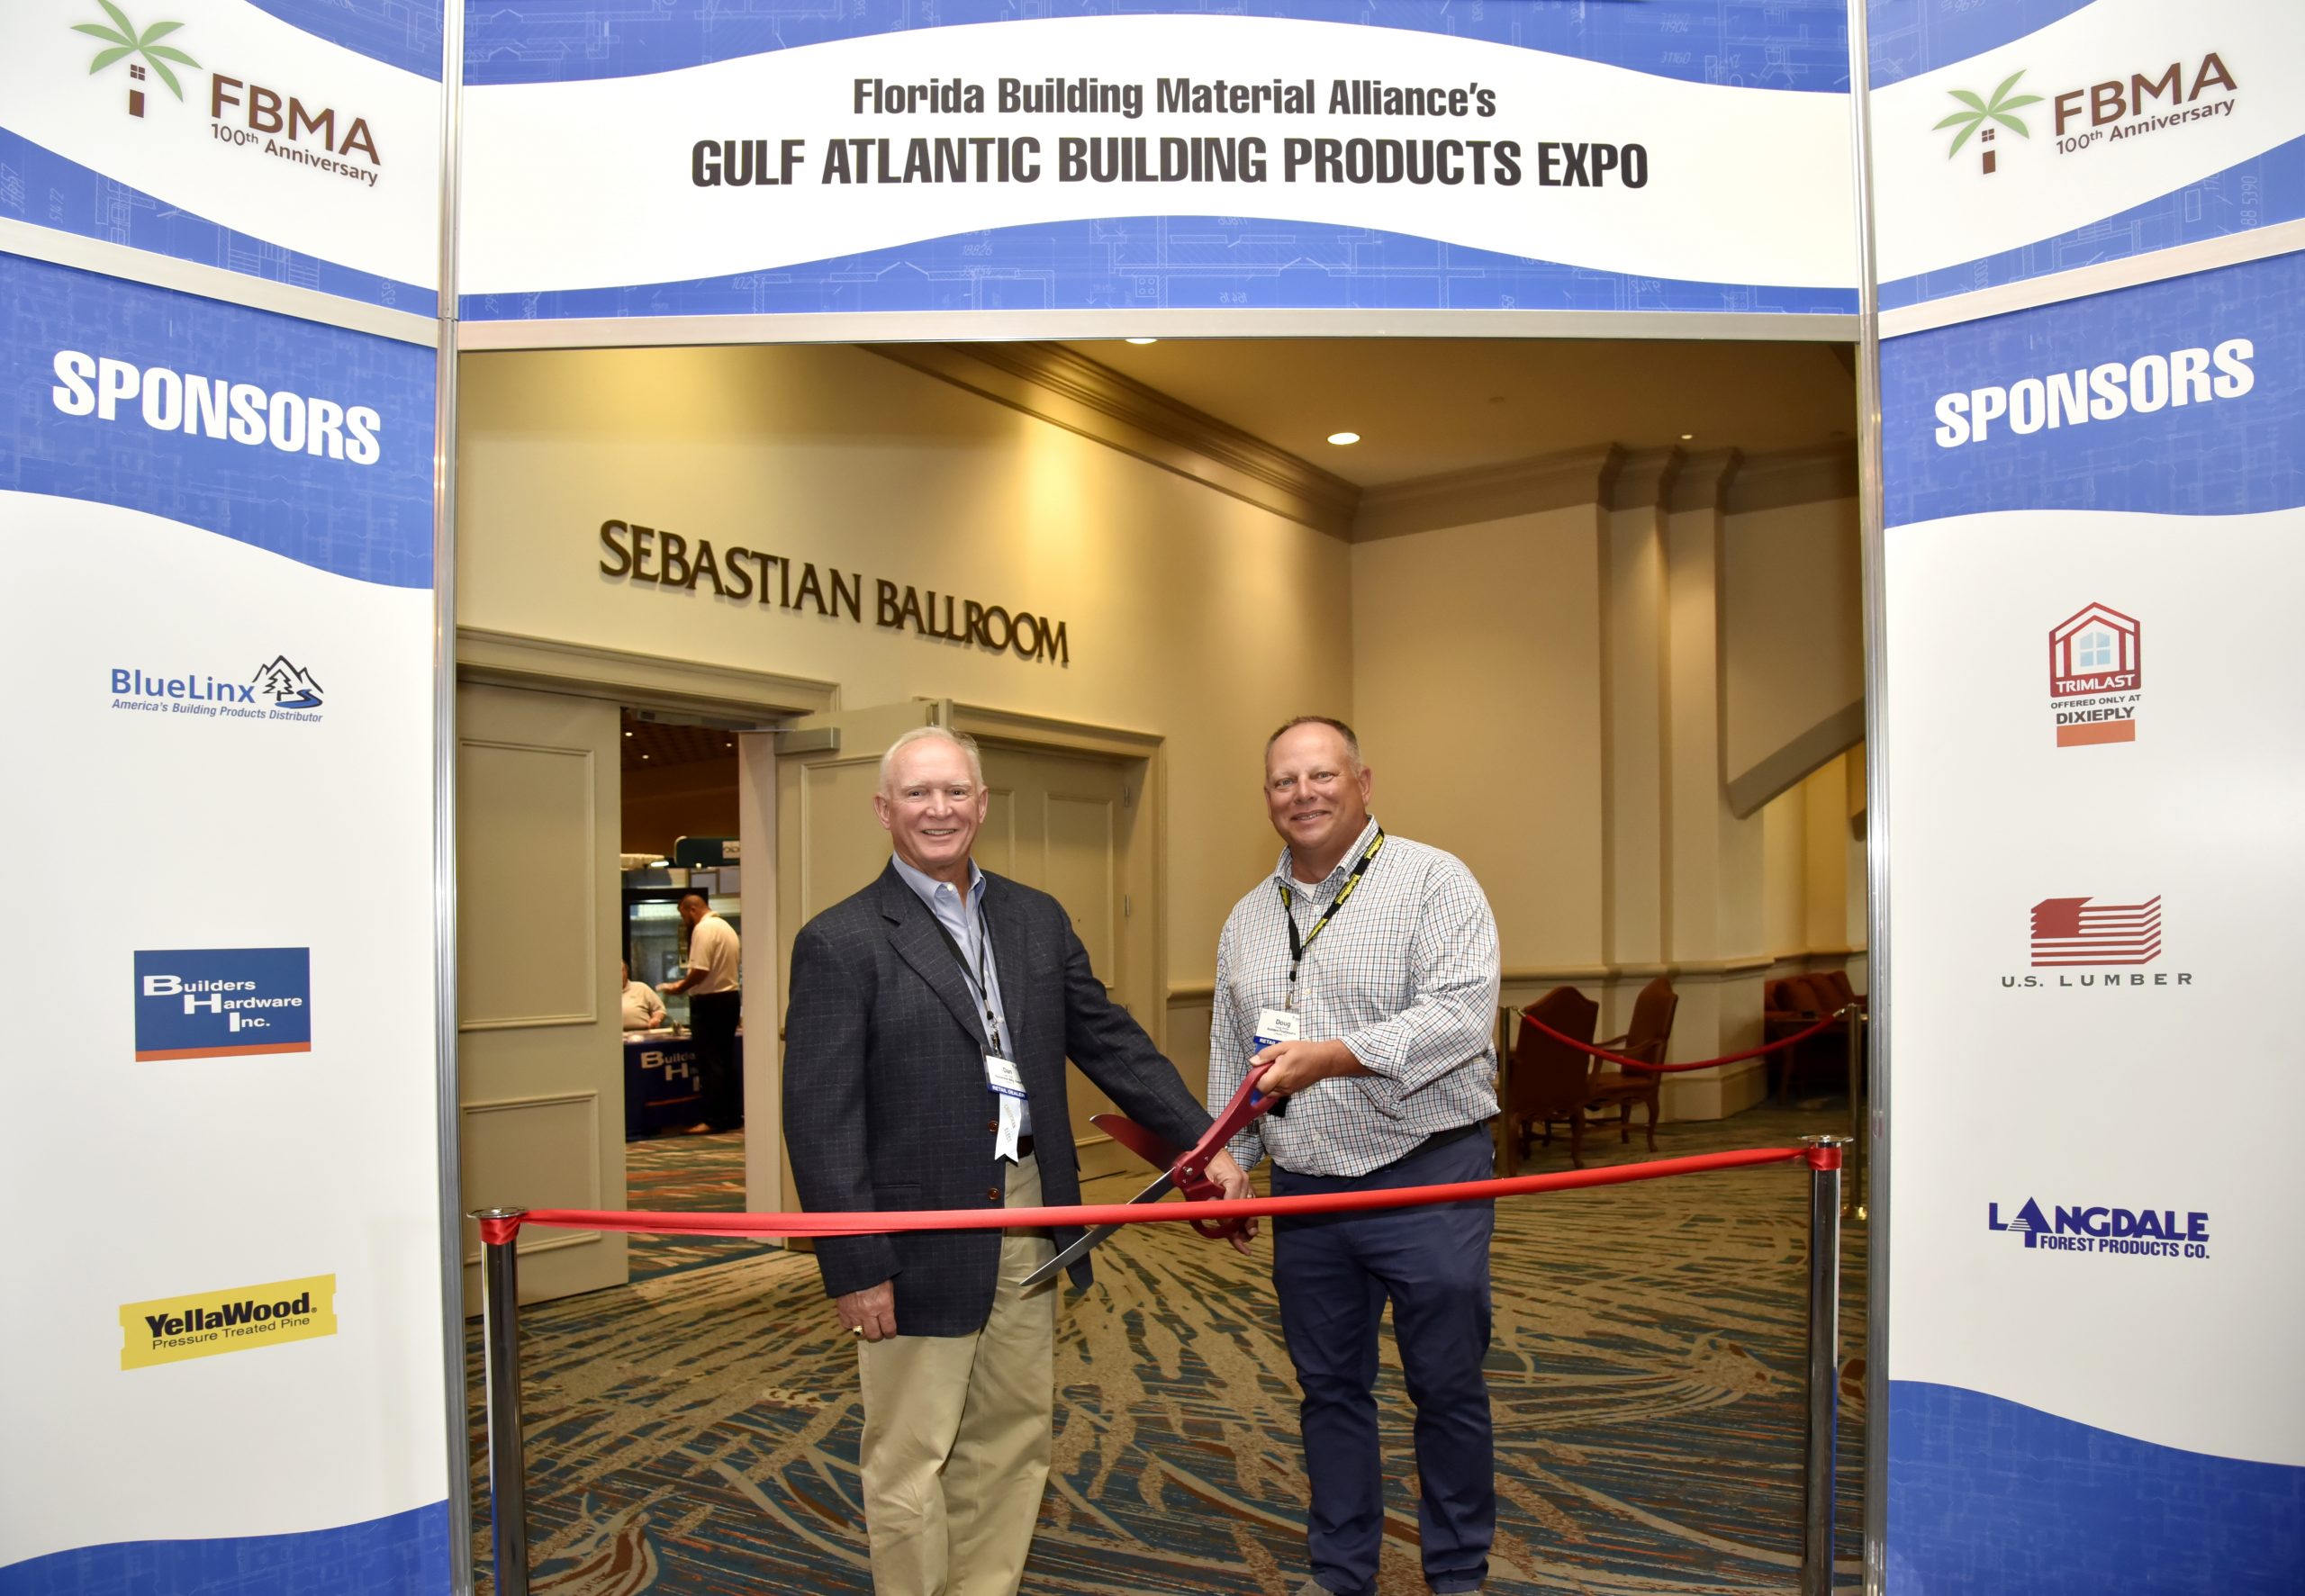 FBMA members cutting a ceremonial ribbon at the Gulf Atlantic Building Products Expo.